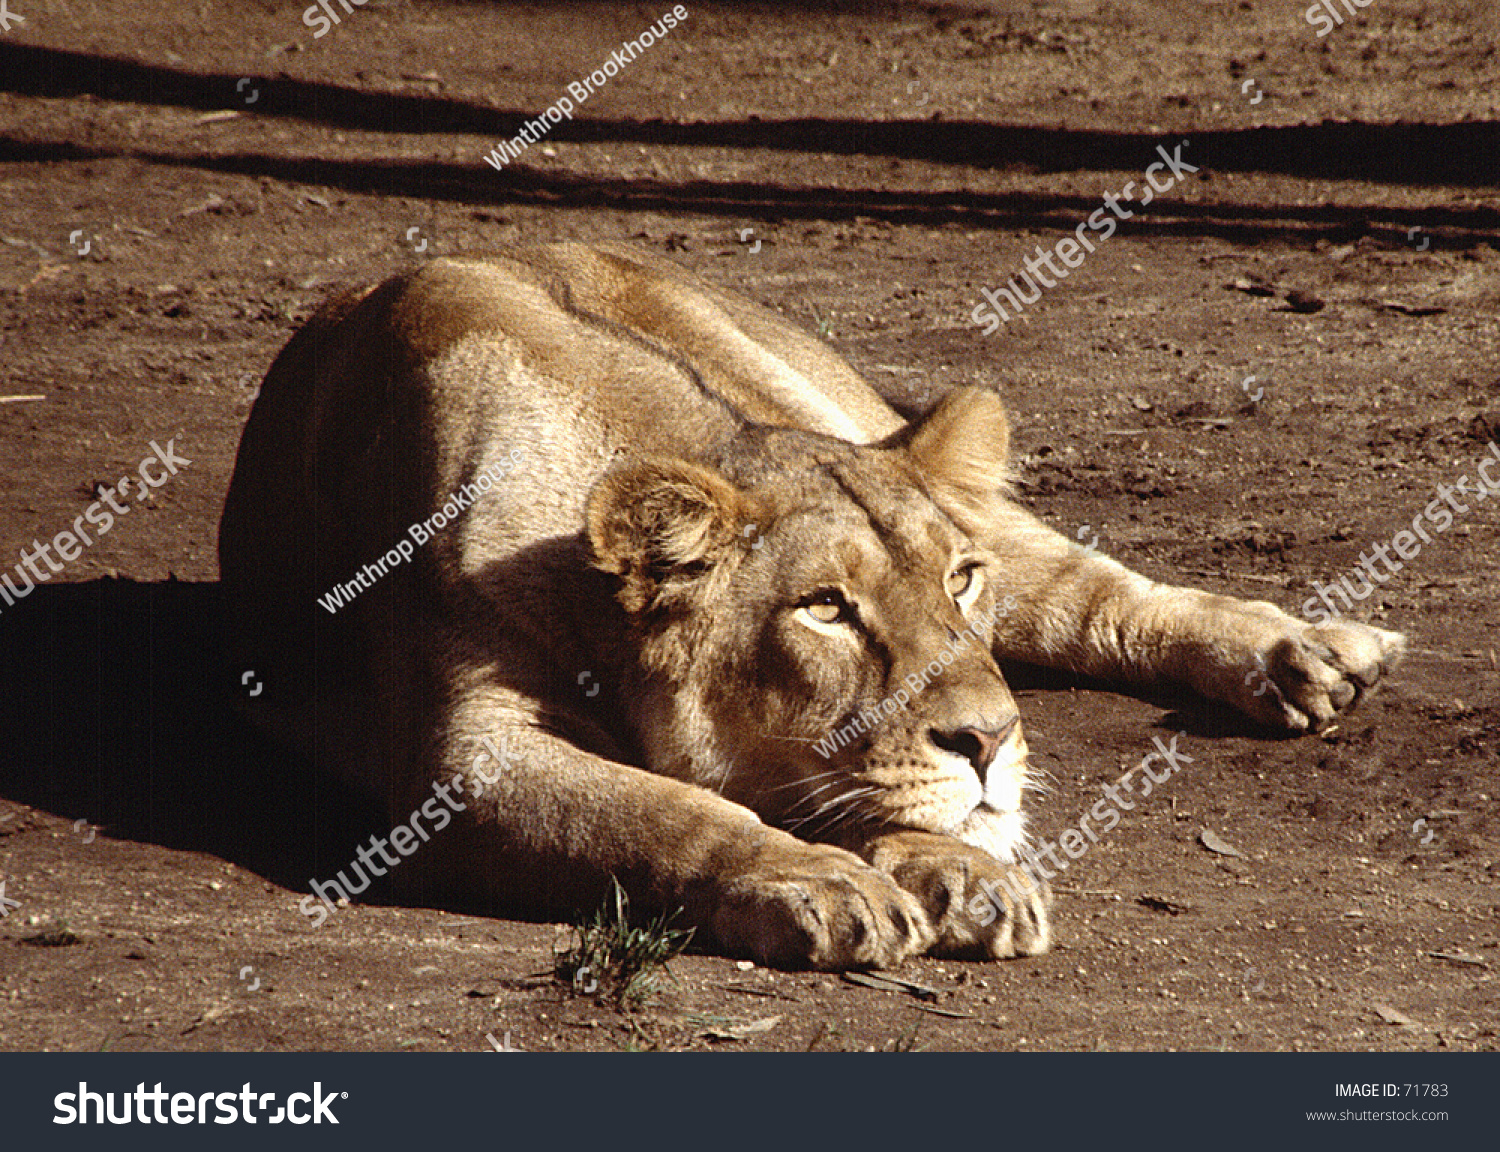 stock-photo-lioness-laying-down-71783.jpg